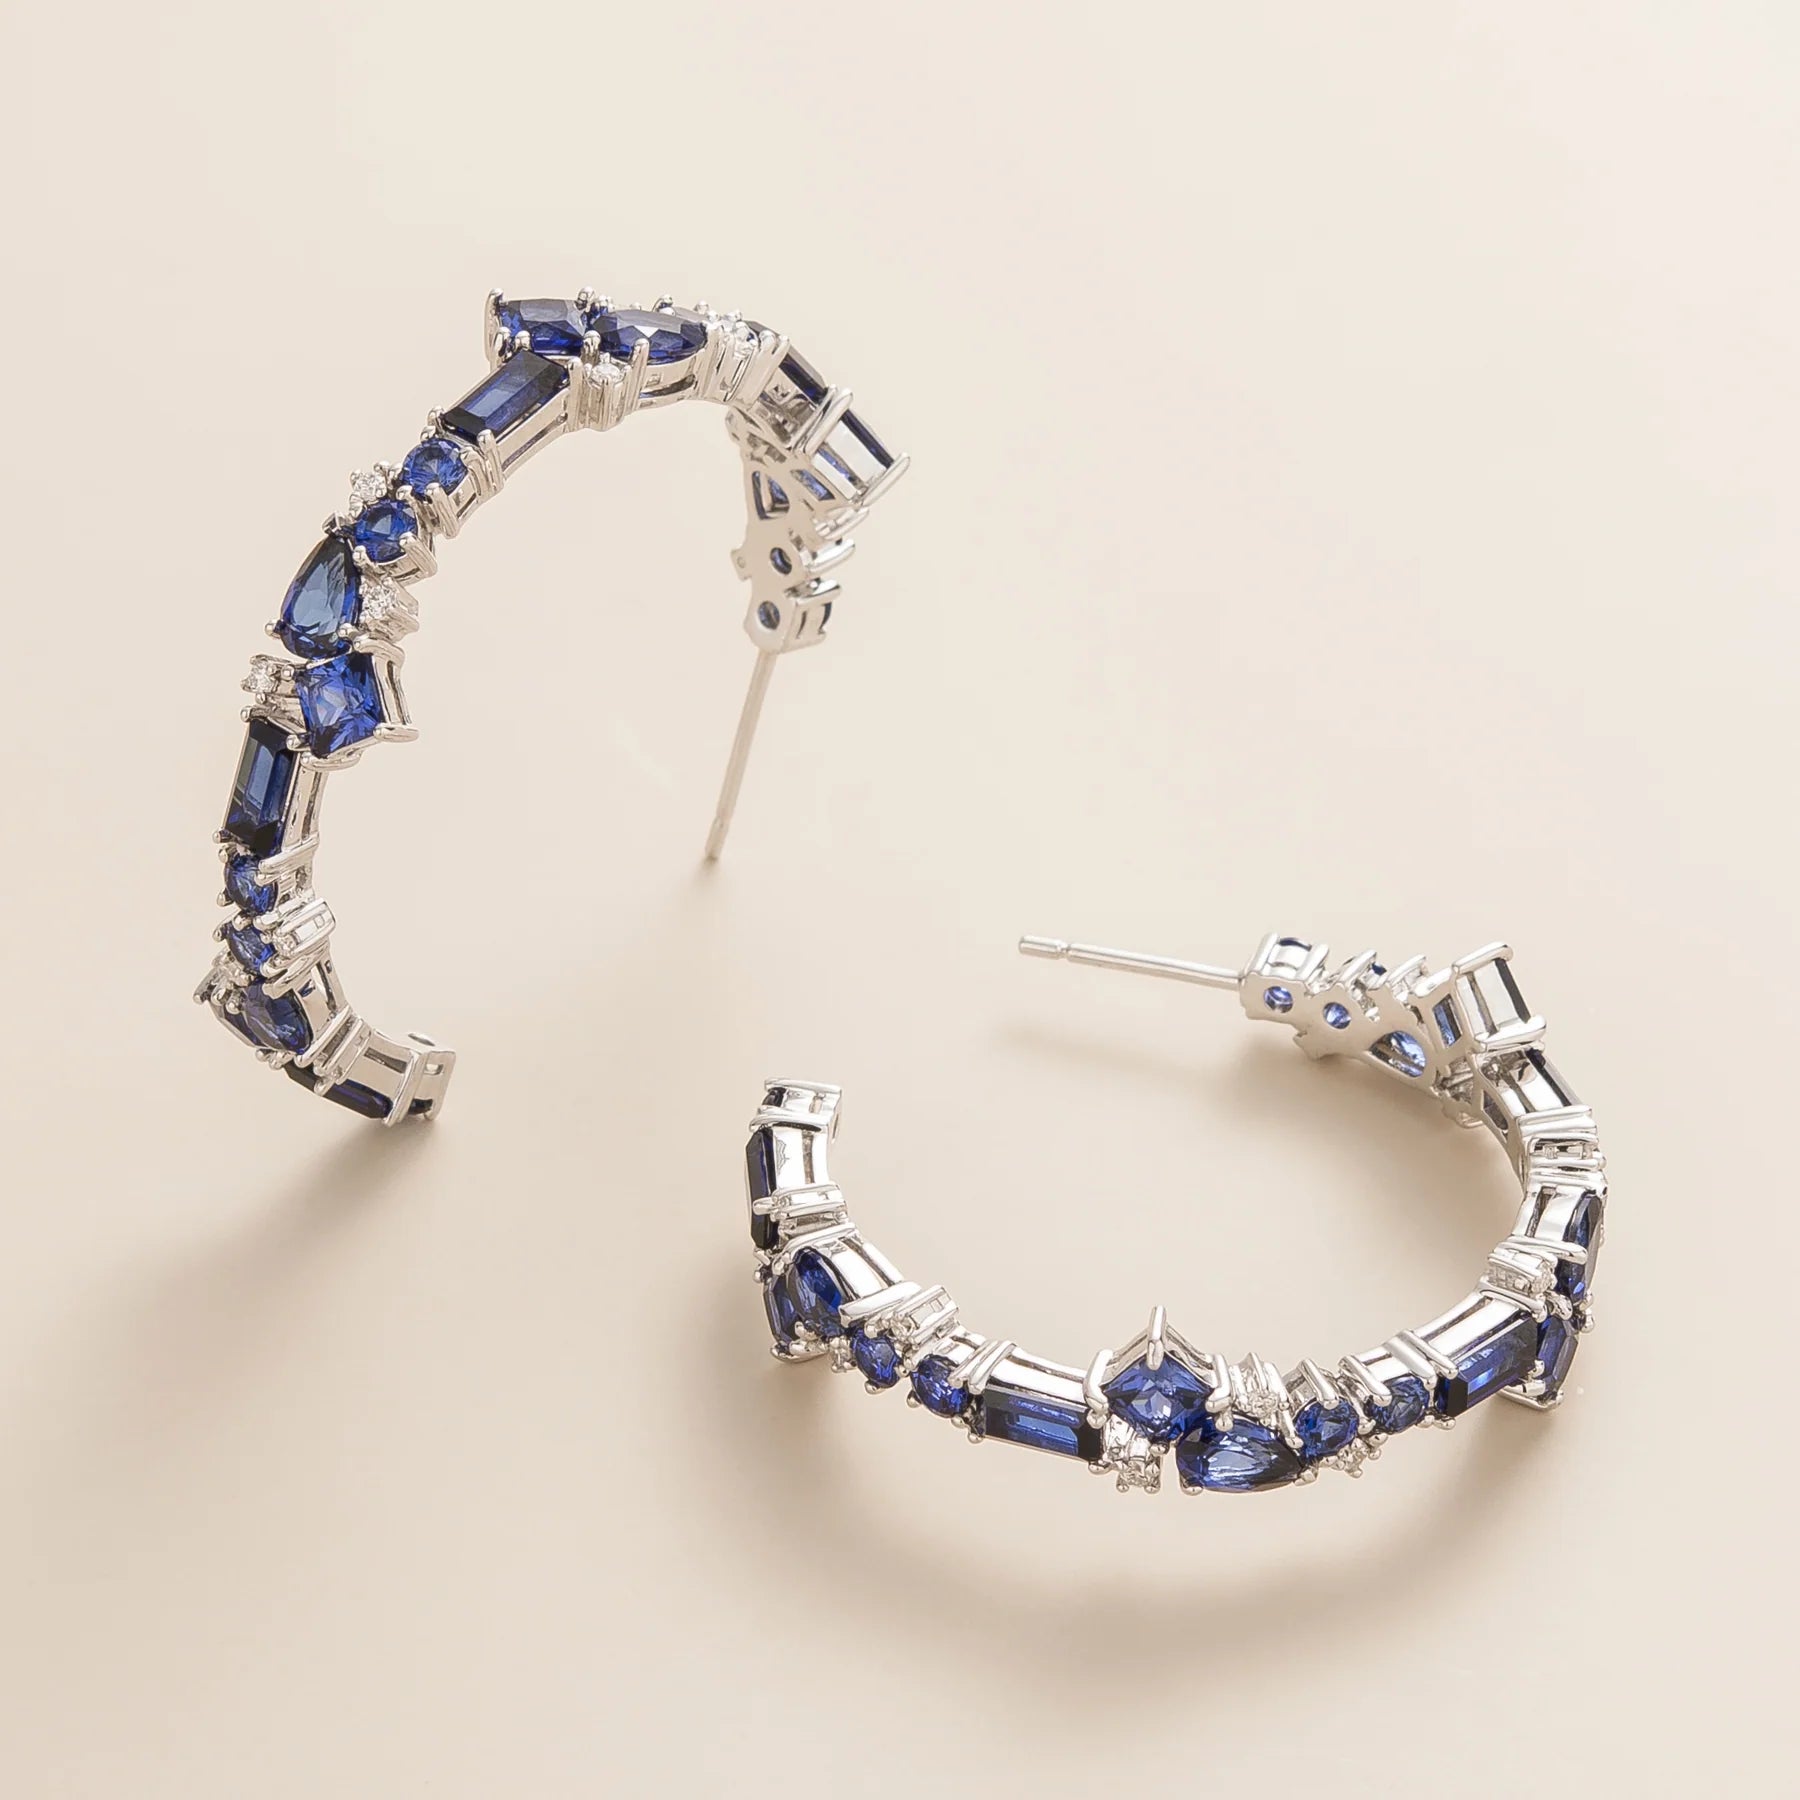 Lanna Large Hoop Earrings Set With Blue Sapphire earrings with Diamond By Juvetti London UK